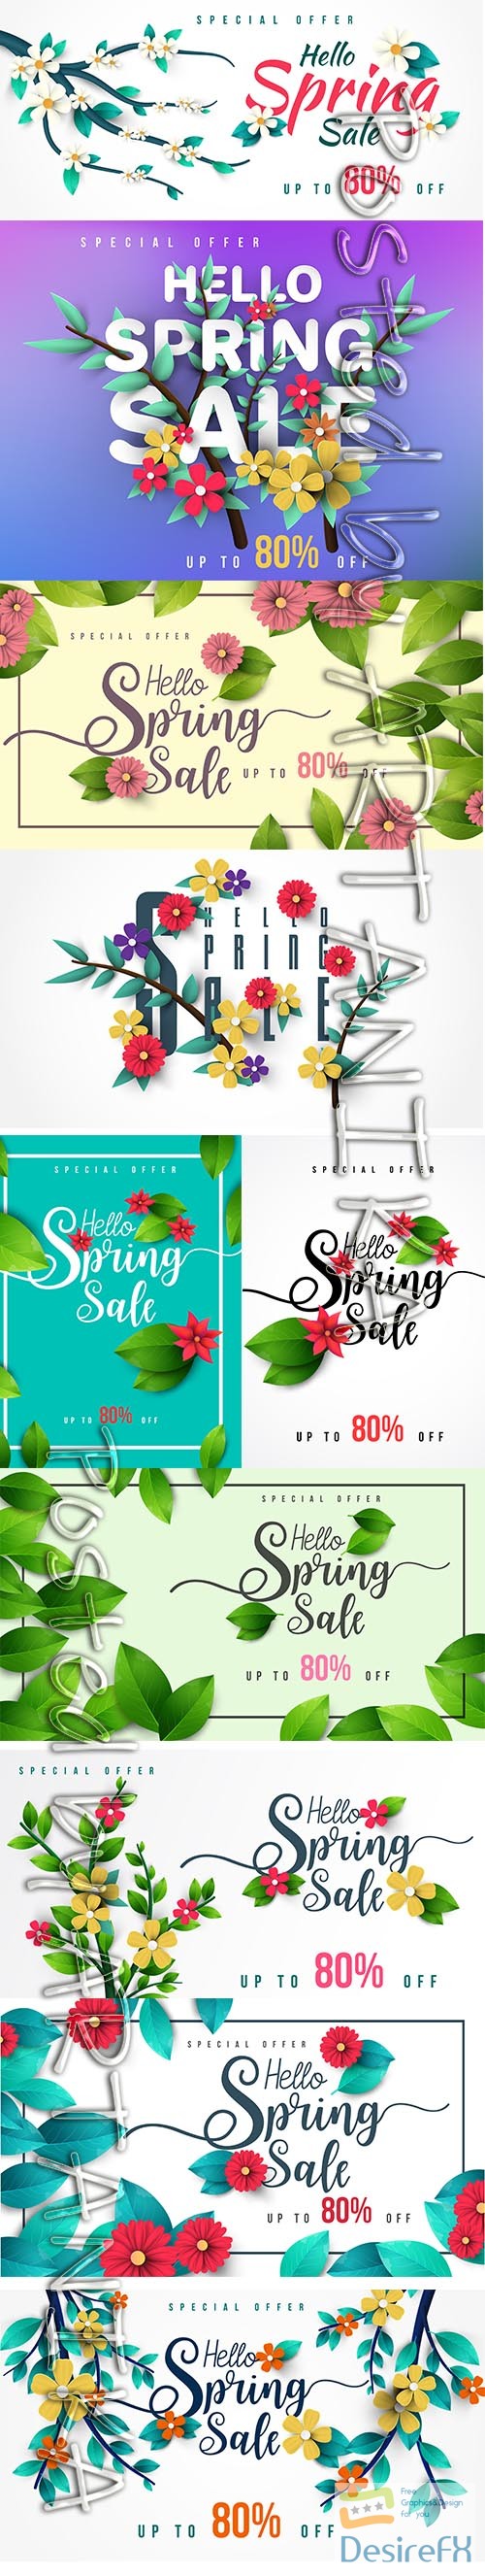 Collection of Spring Sale Banner Vector Illustrations